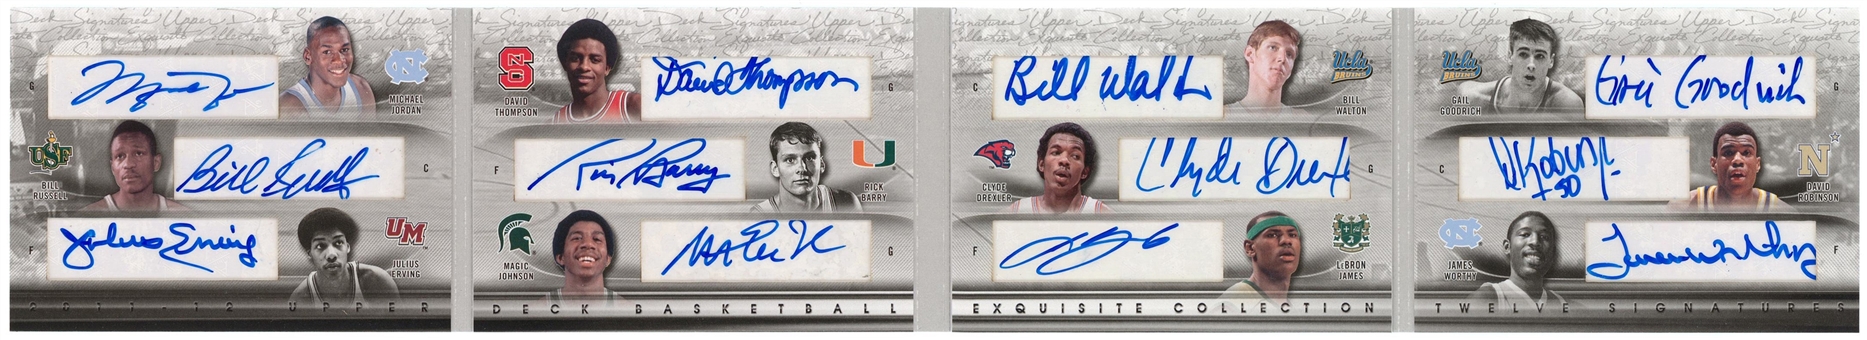 2011/12 UD "Exquisite Collection" Basketball Signatures #E12-16 Multi-Signed Quad-Fold Booklet (#1/1) – Twelve Signatures, Including Michael Jordan, LeBron James, Bill Russell and More!